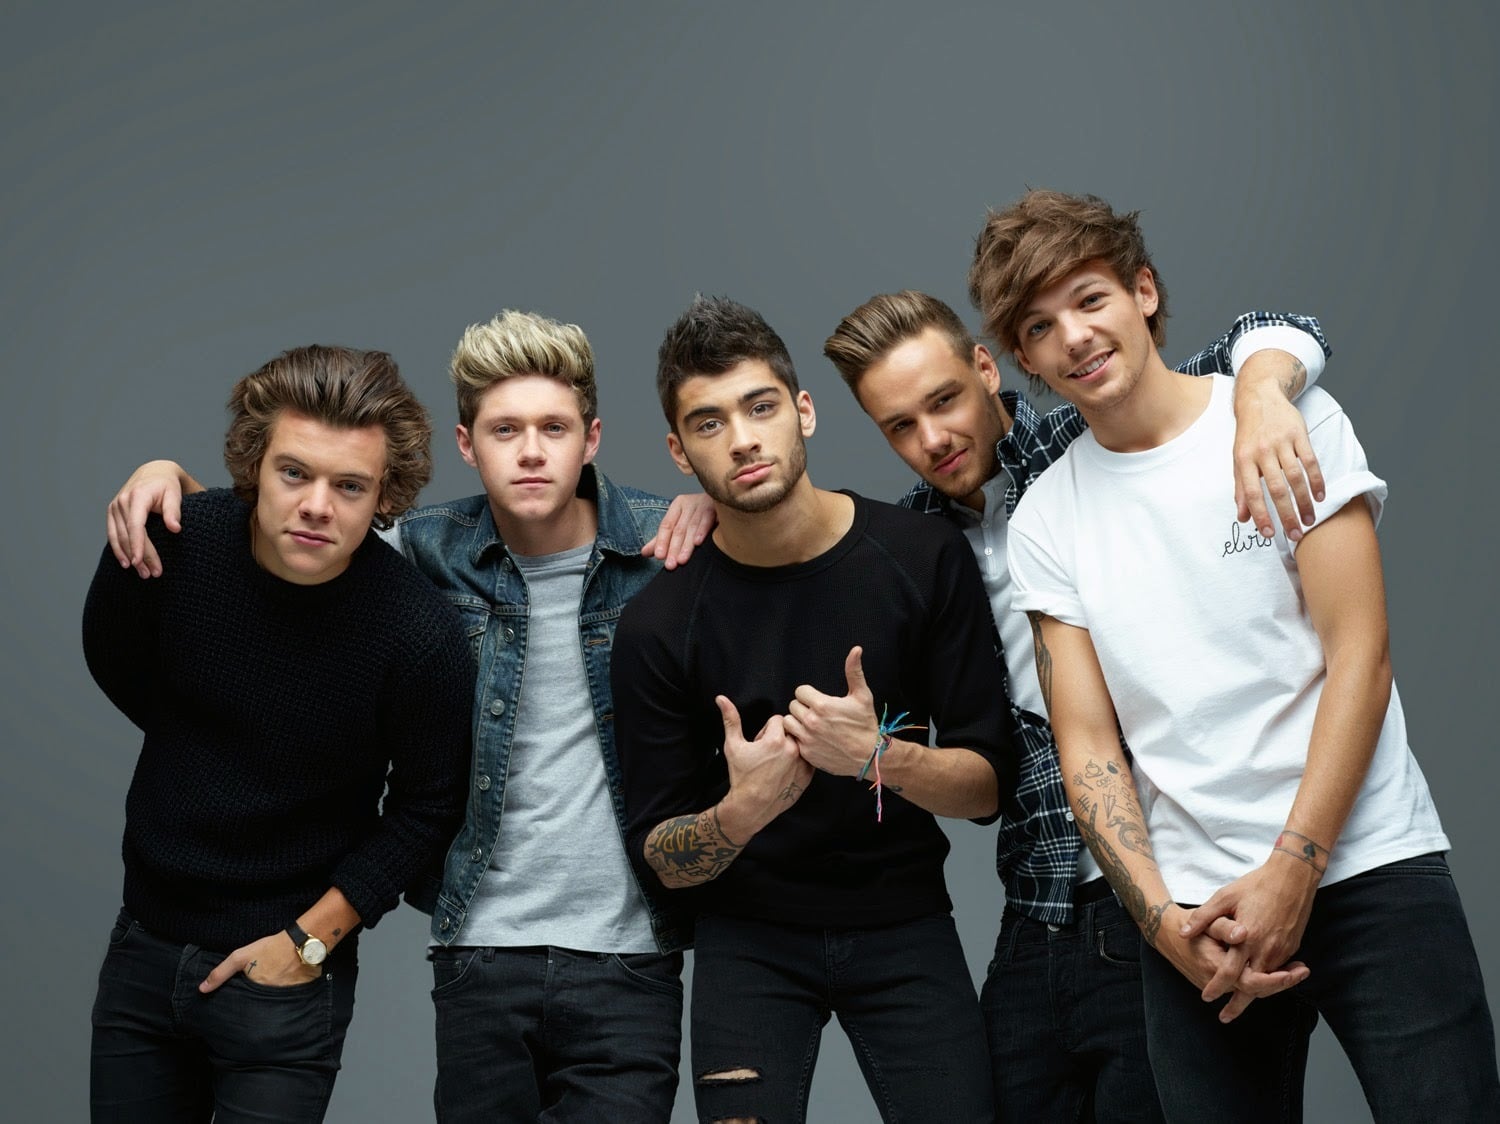 Everything Members of One Direction Have Said About Their Time in the Band